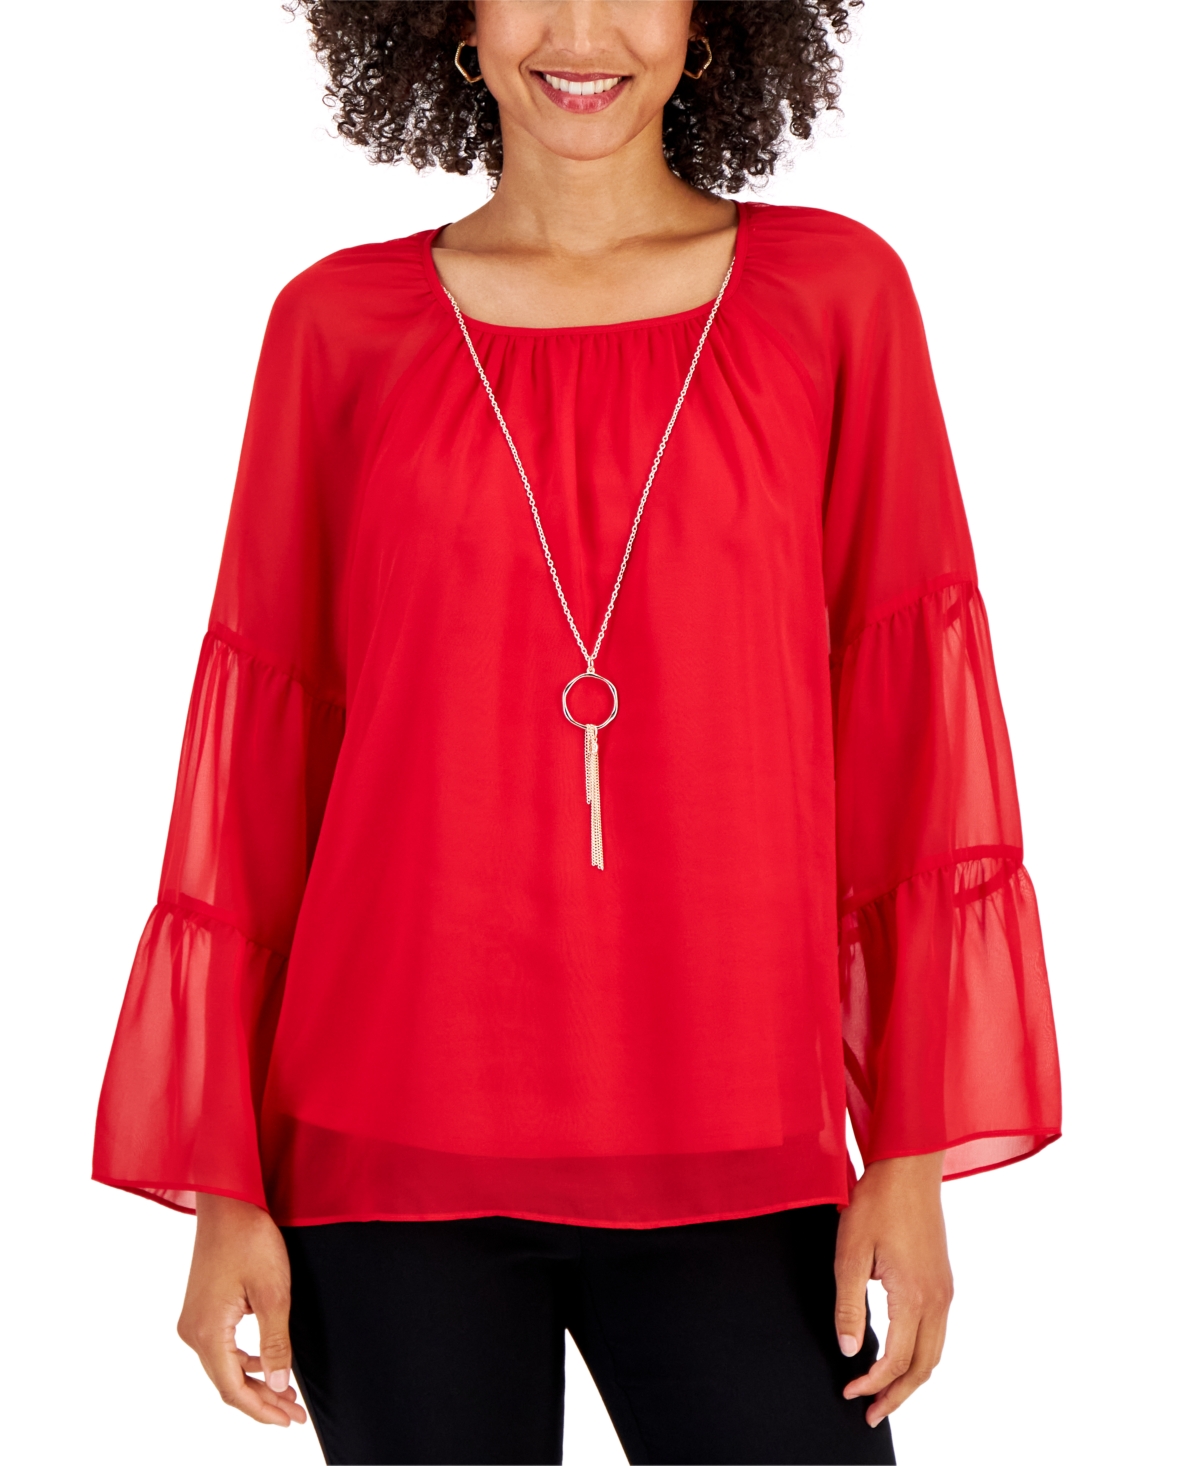 Jm Collection Women's Solid Tiered Necklace Top, Created for Macy's